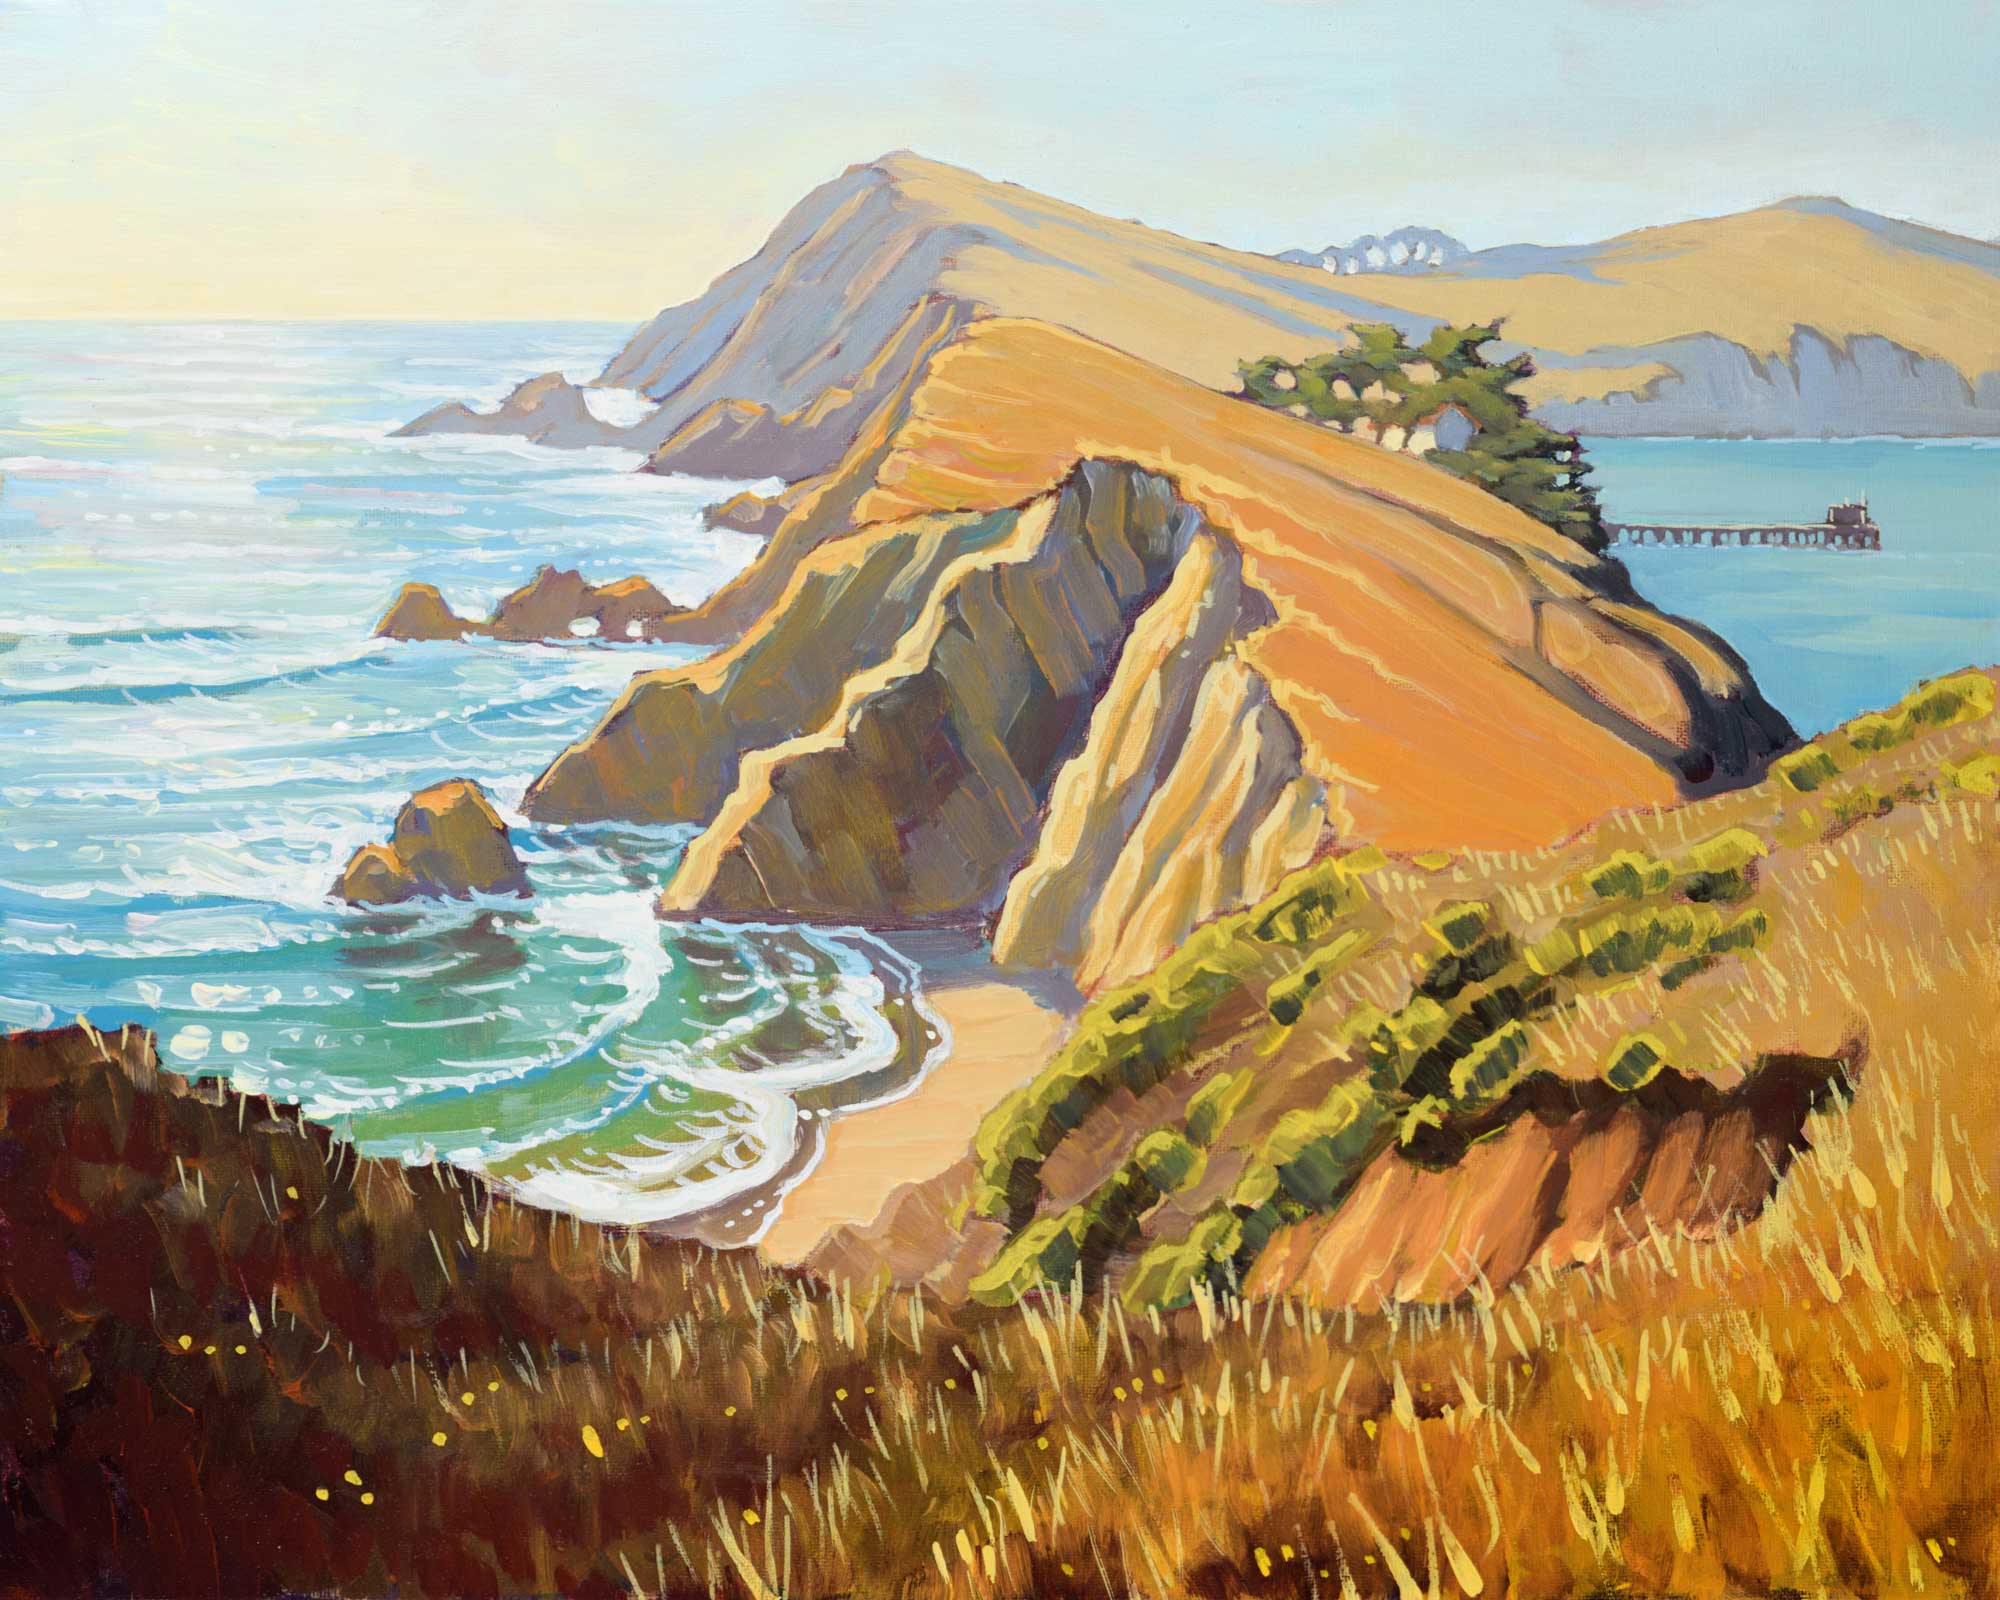 Plein air artwork of Point Reyes National Park on the Marin coast of northern California